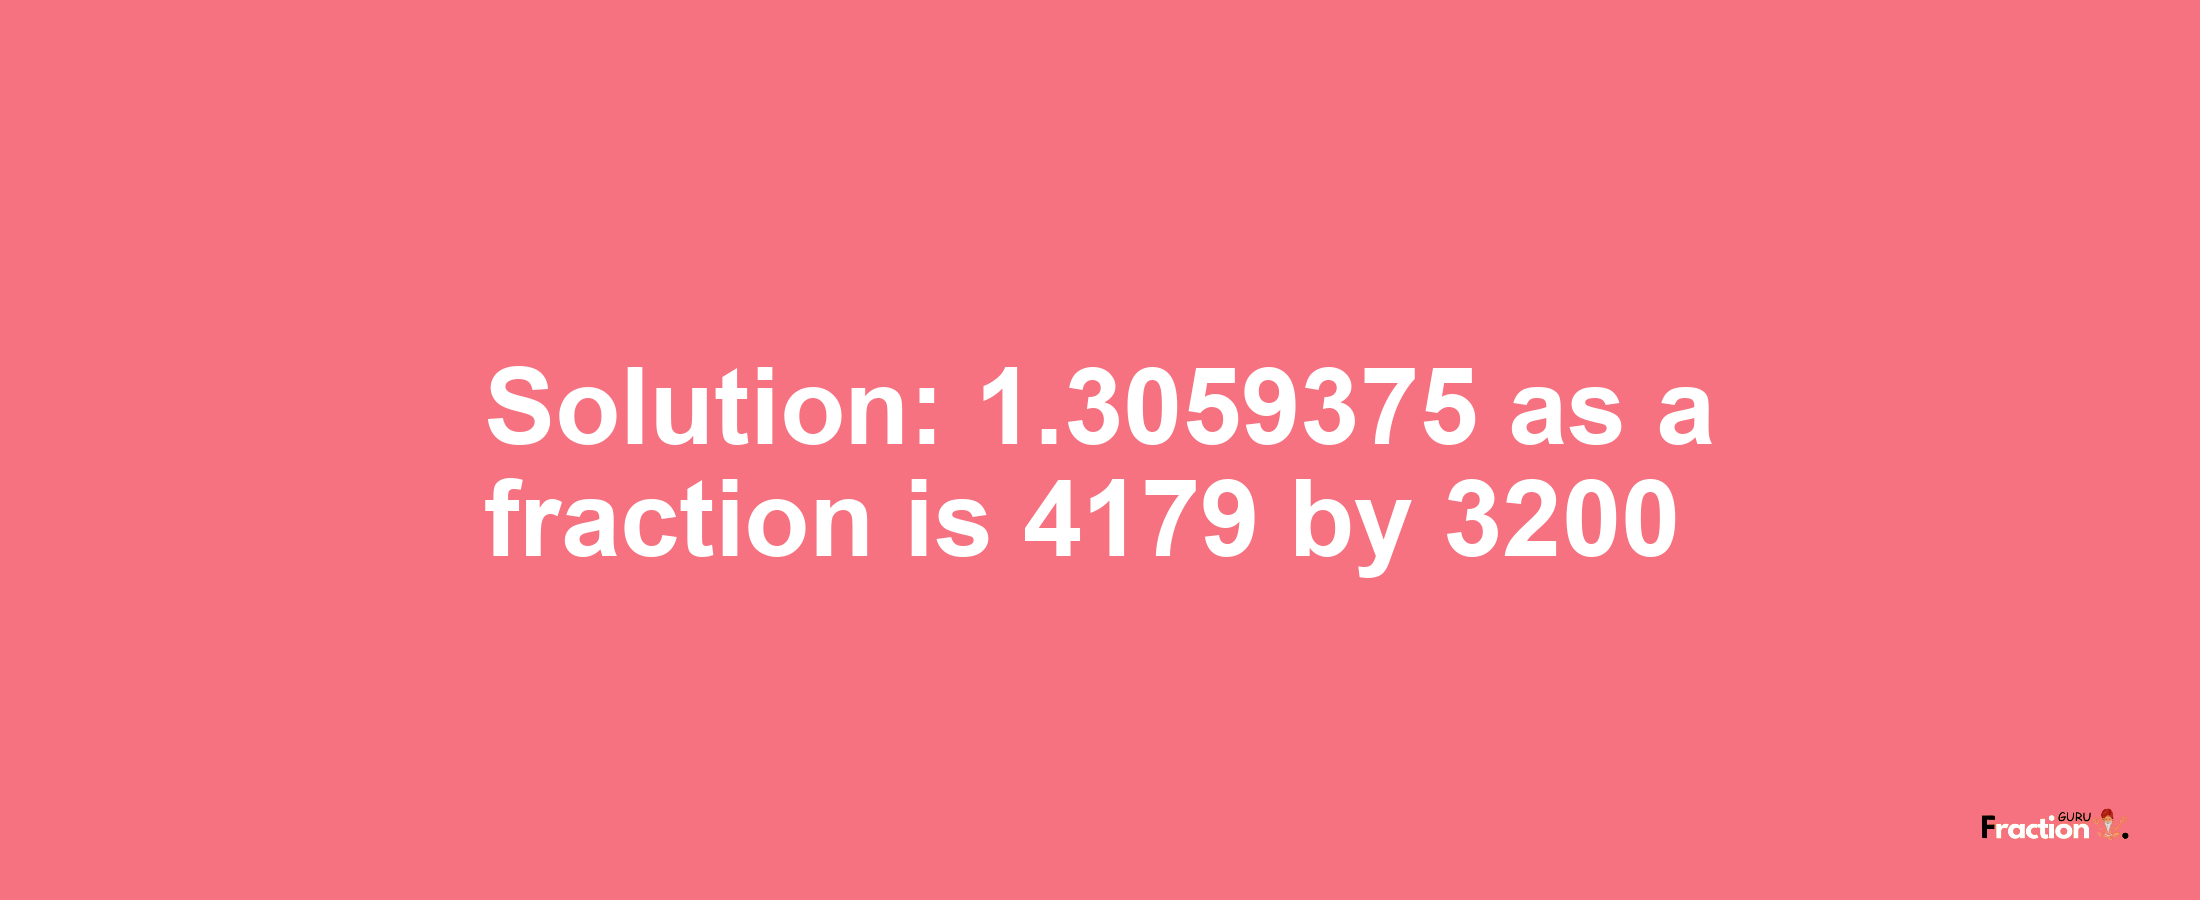 Solution:1.3059375 as a fraction is 4179/3200